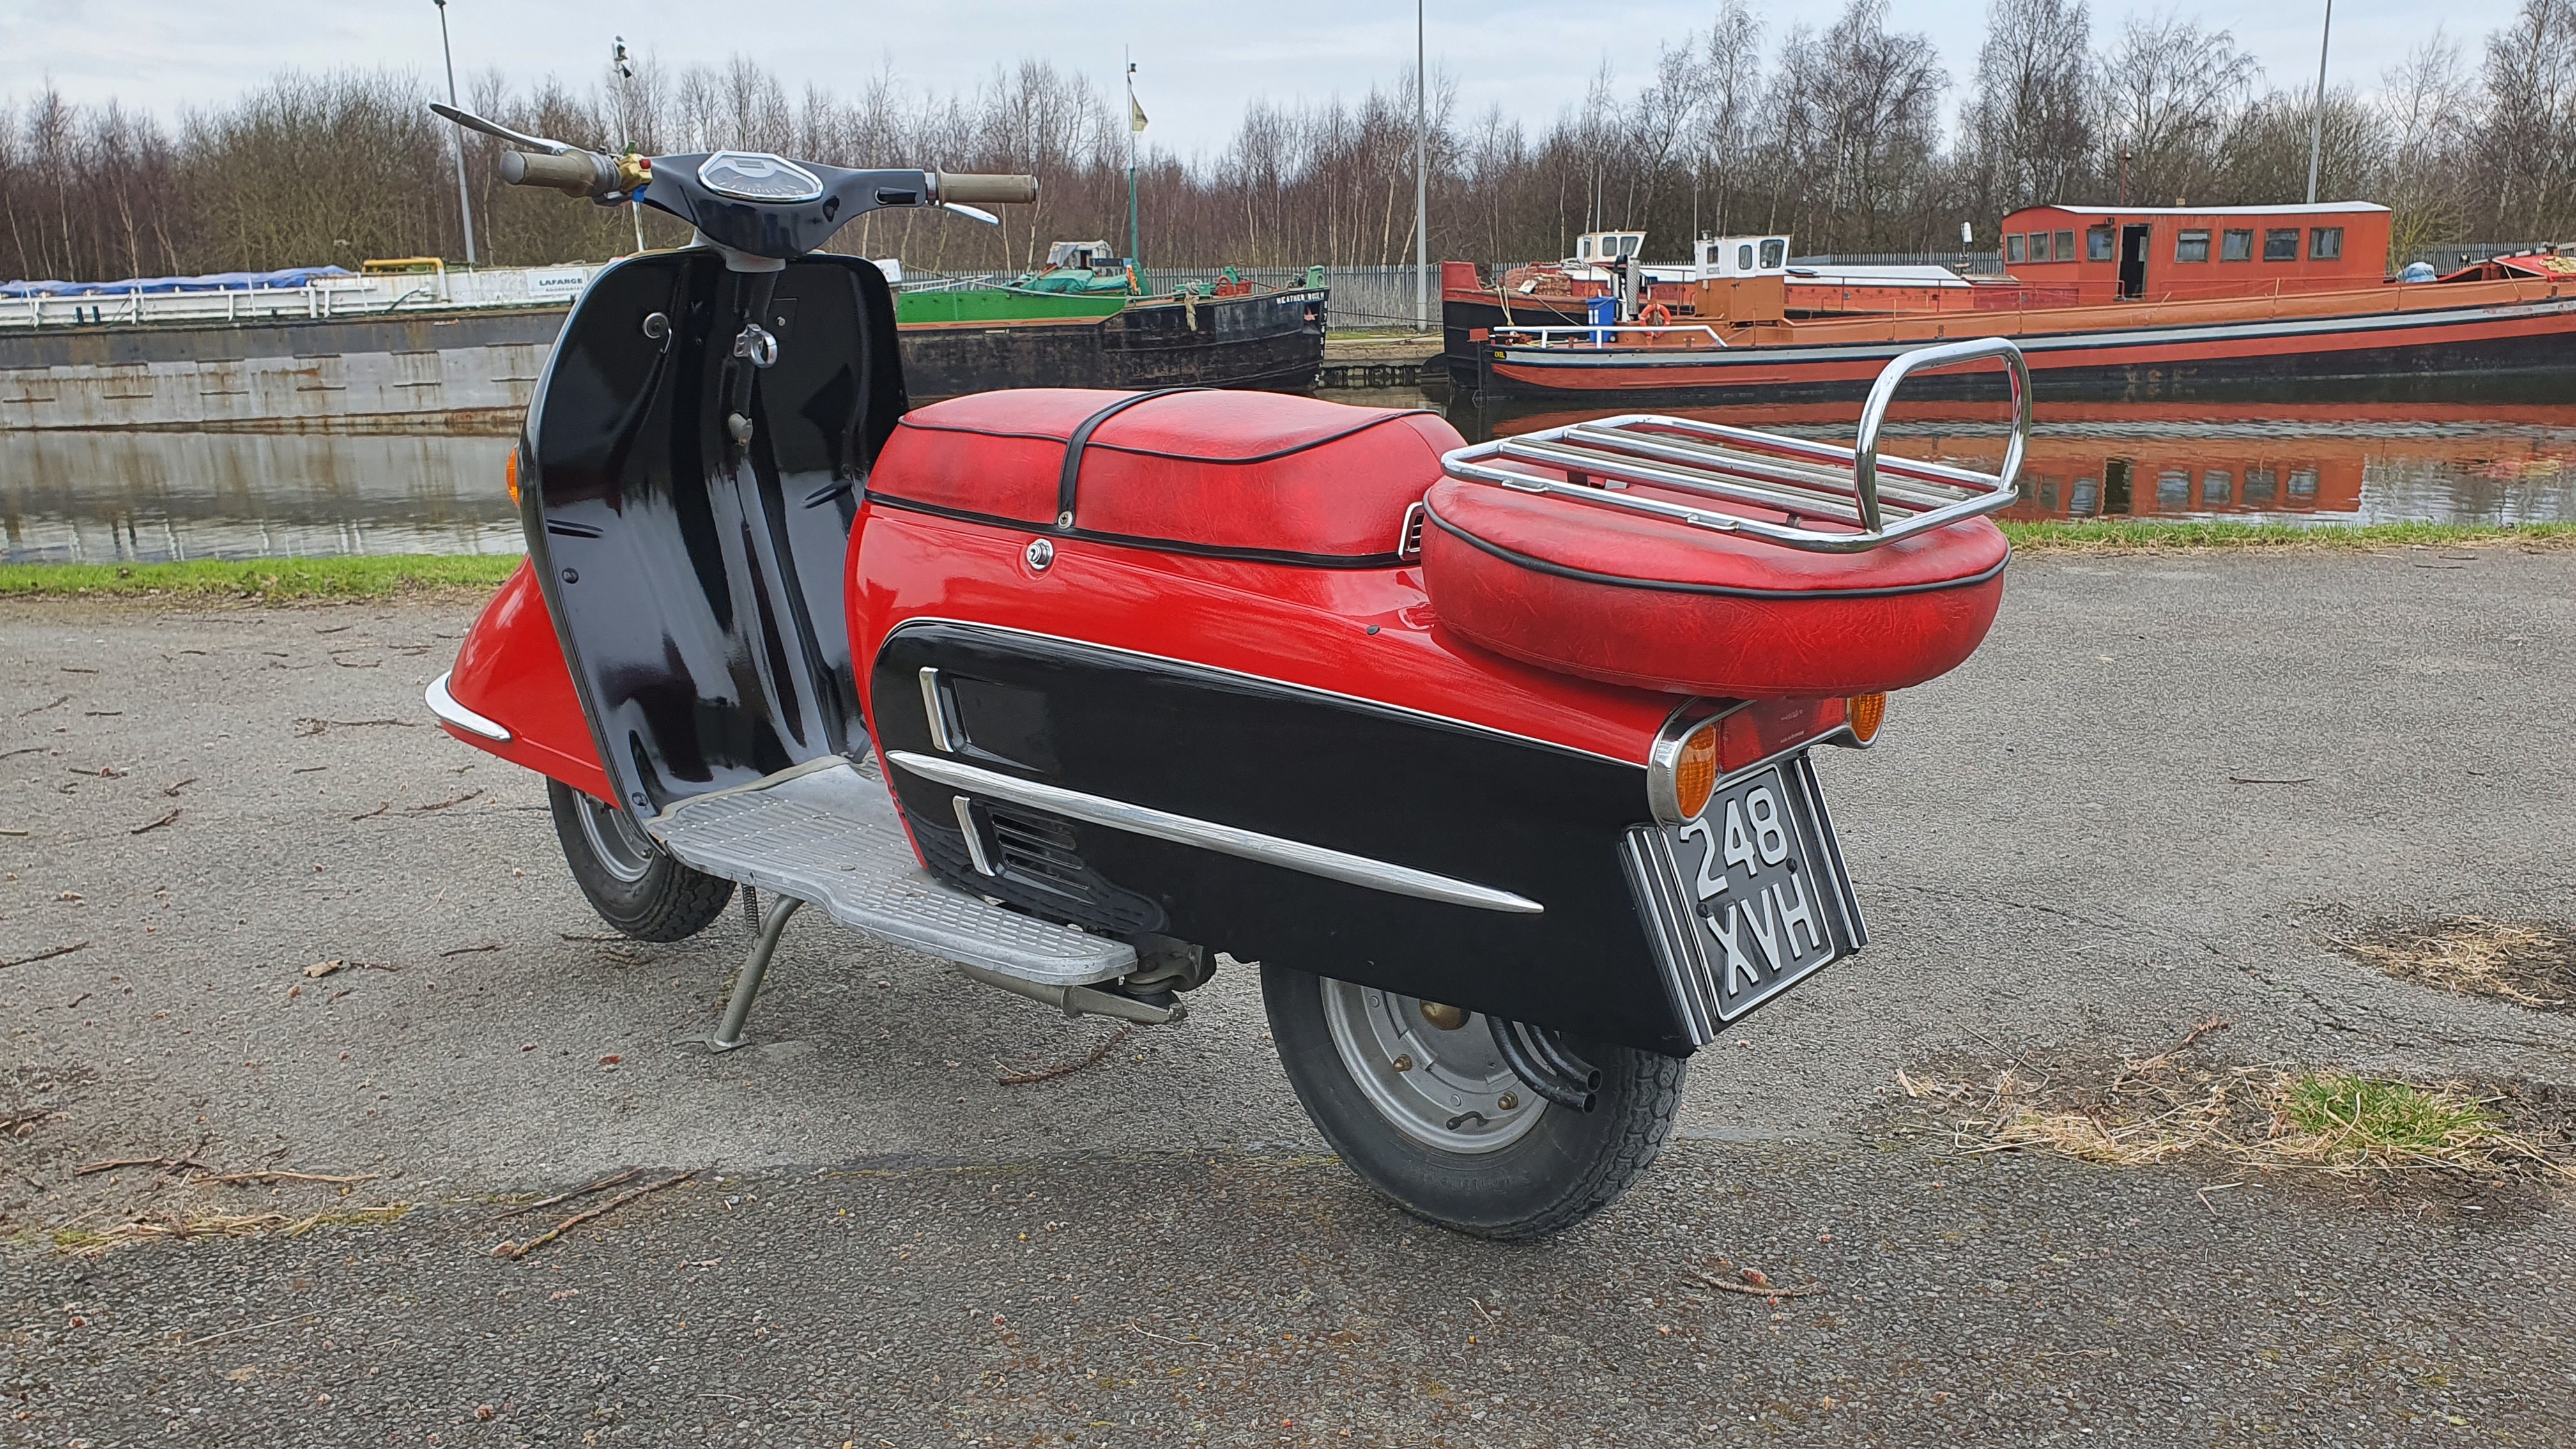 1962 Heinkel Tourist A-02, 174cc. Registration number 248 XVH (non transferrable). - Image 8 of 15